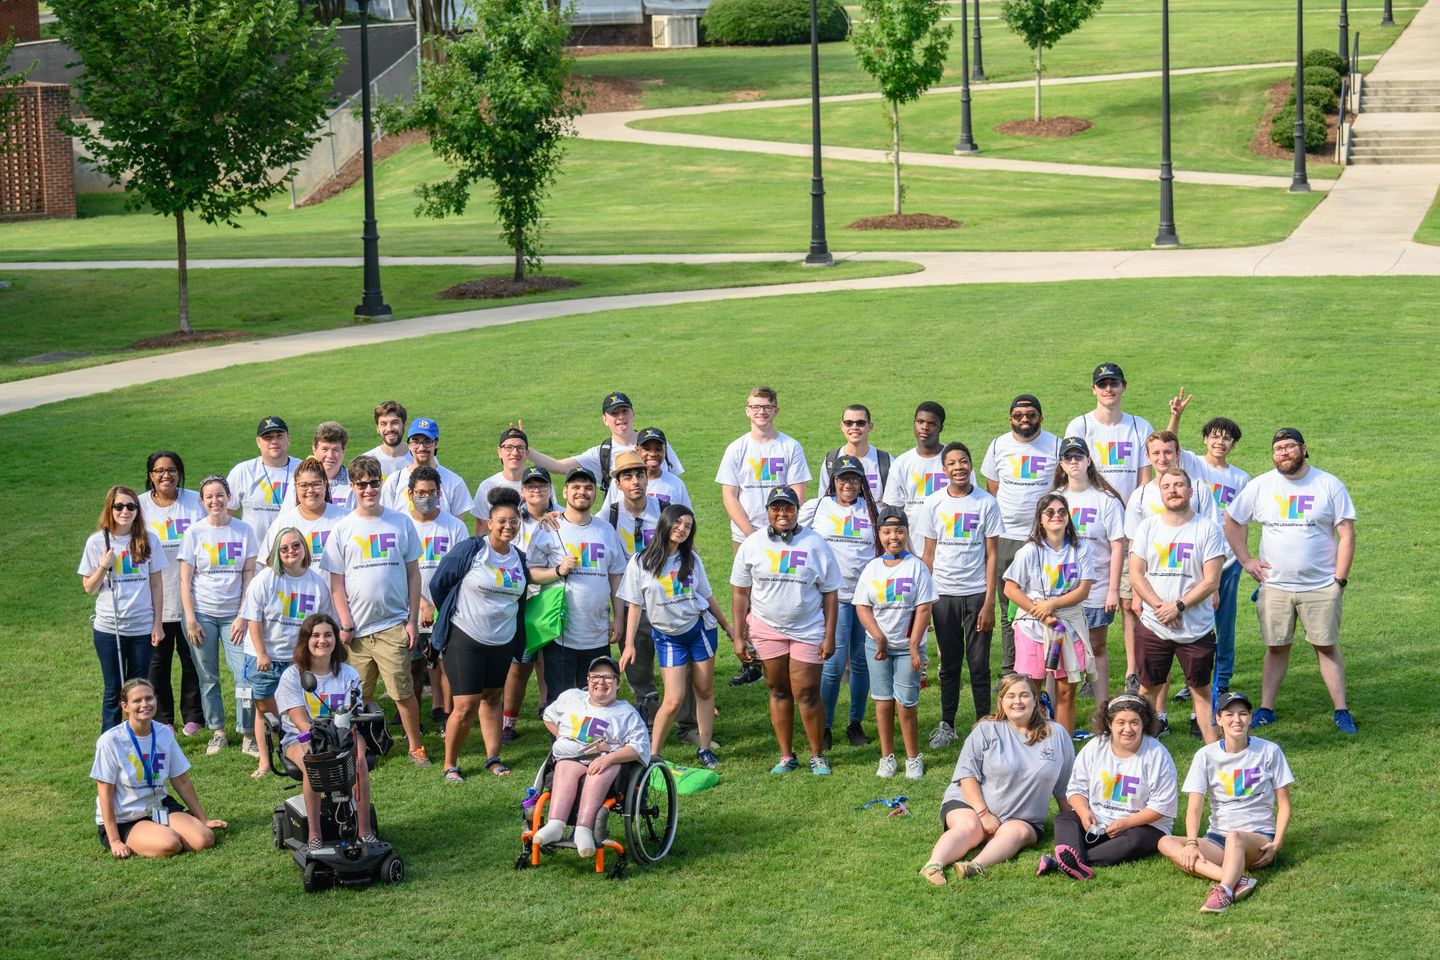 A group photo of YLF participants and staff smiling at the camera. Everyone is wearing a YLF tshirt with multi-colored YLF letters. The group is standing on a grassy area outside at Presbyterian College with small trees and lampposts in the background.